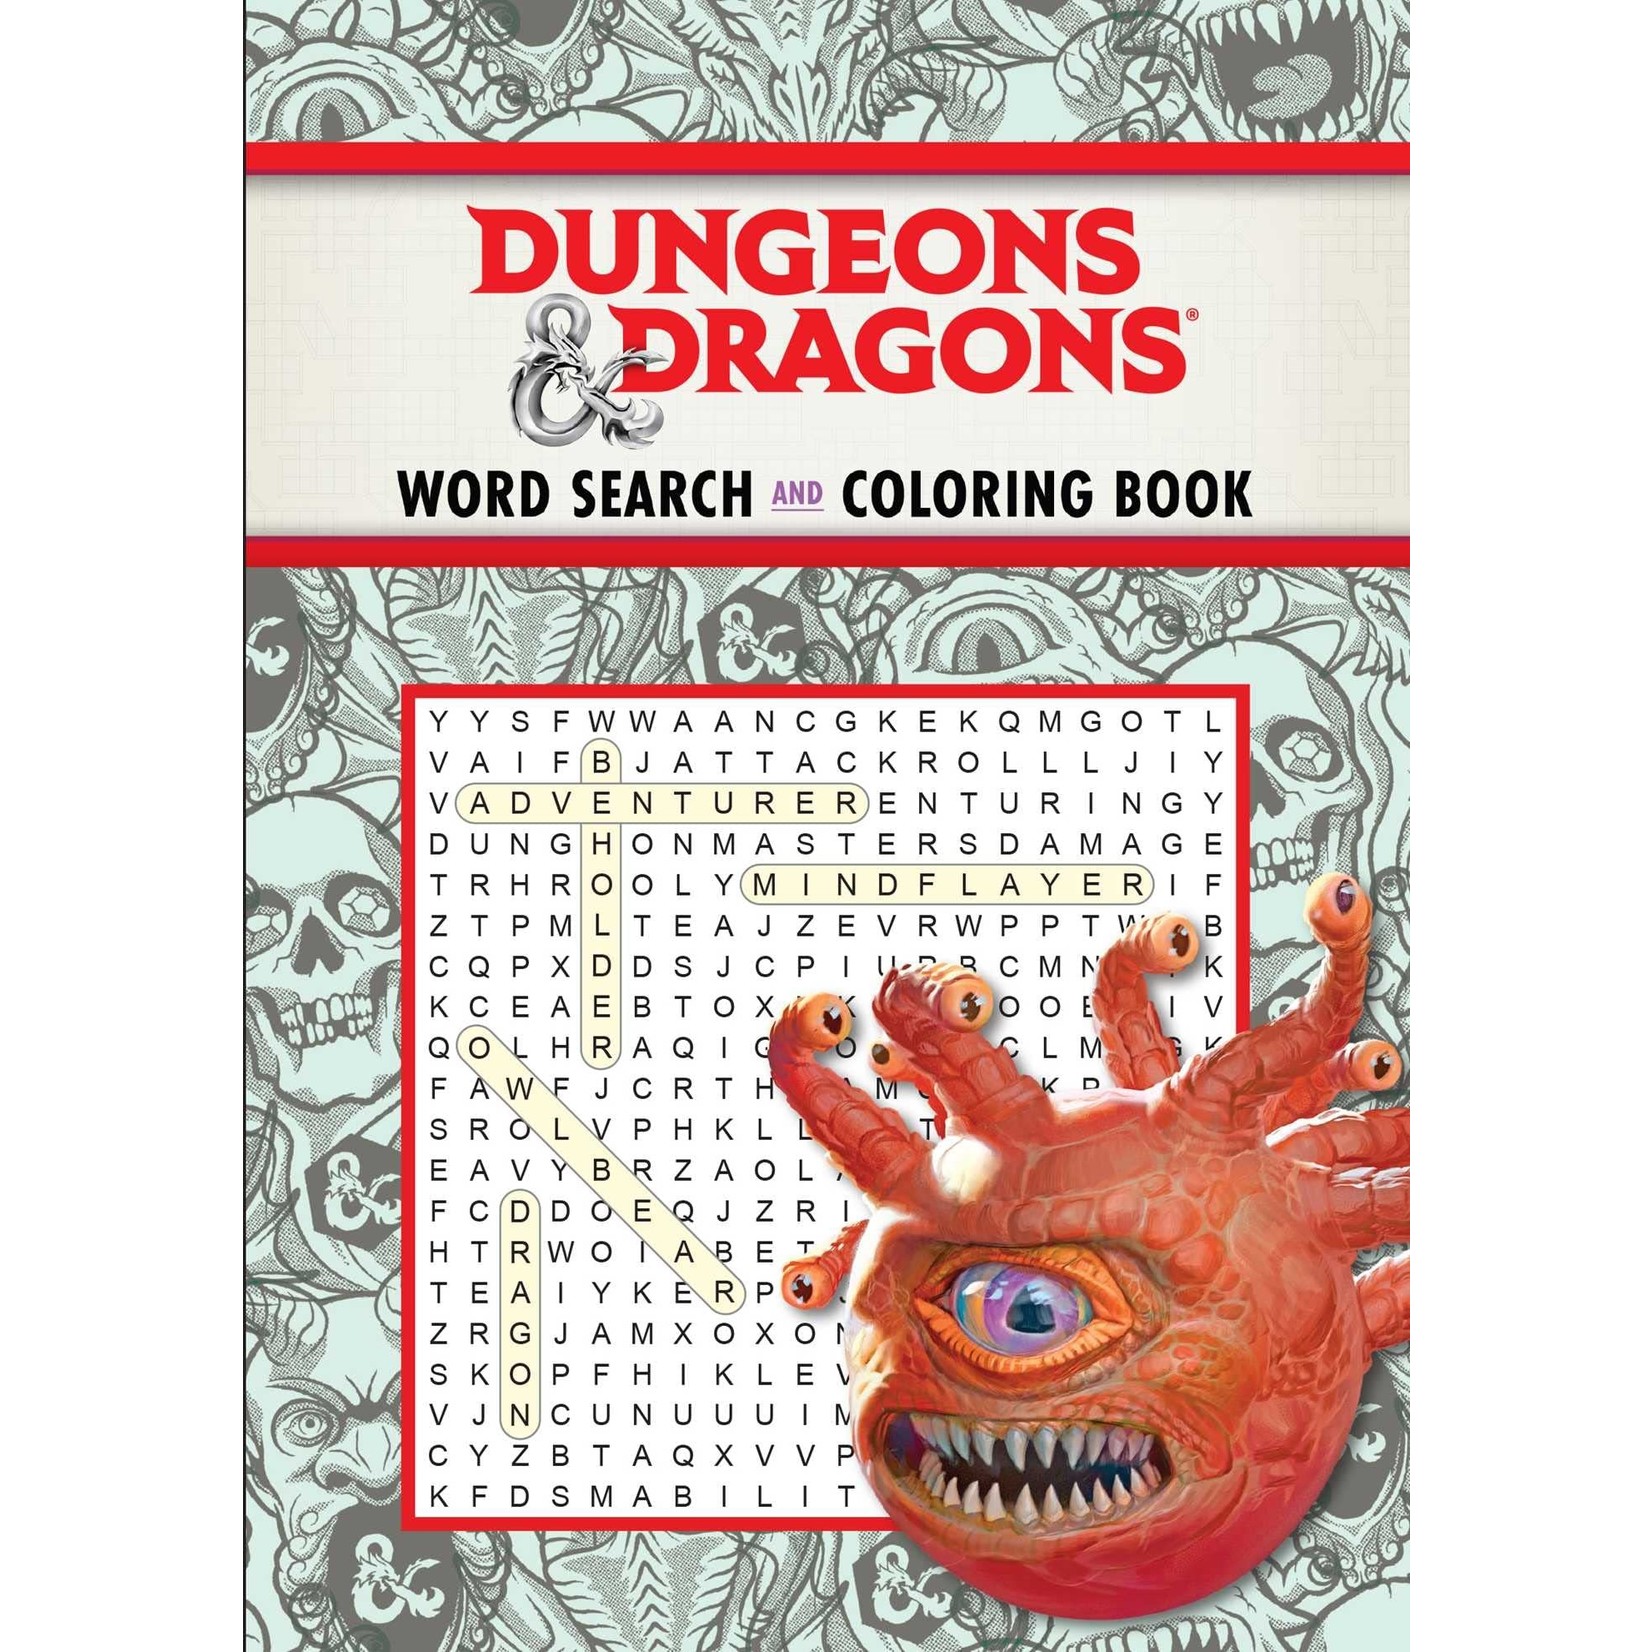 D&D: Word Search and Coloring Book